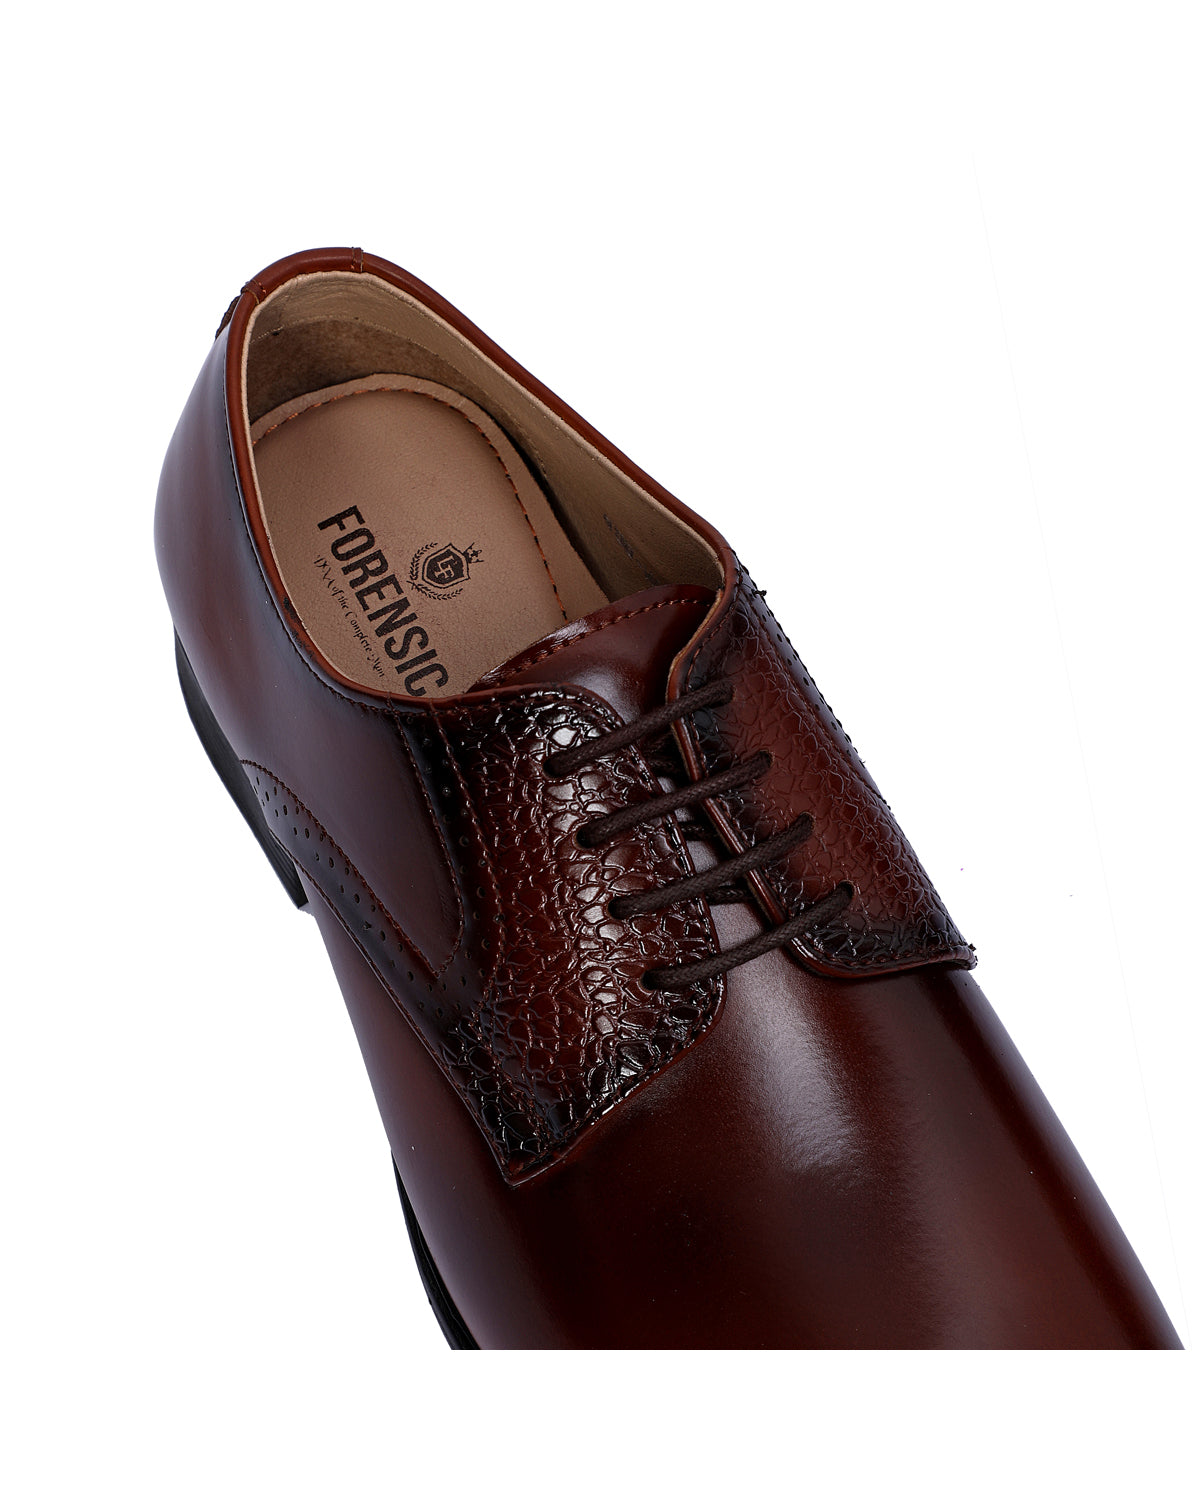 Solid Derby Shoes with Lace-Up Closure - Coffee Brown